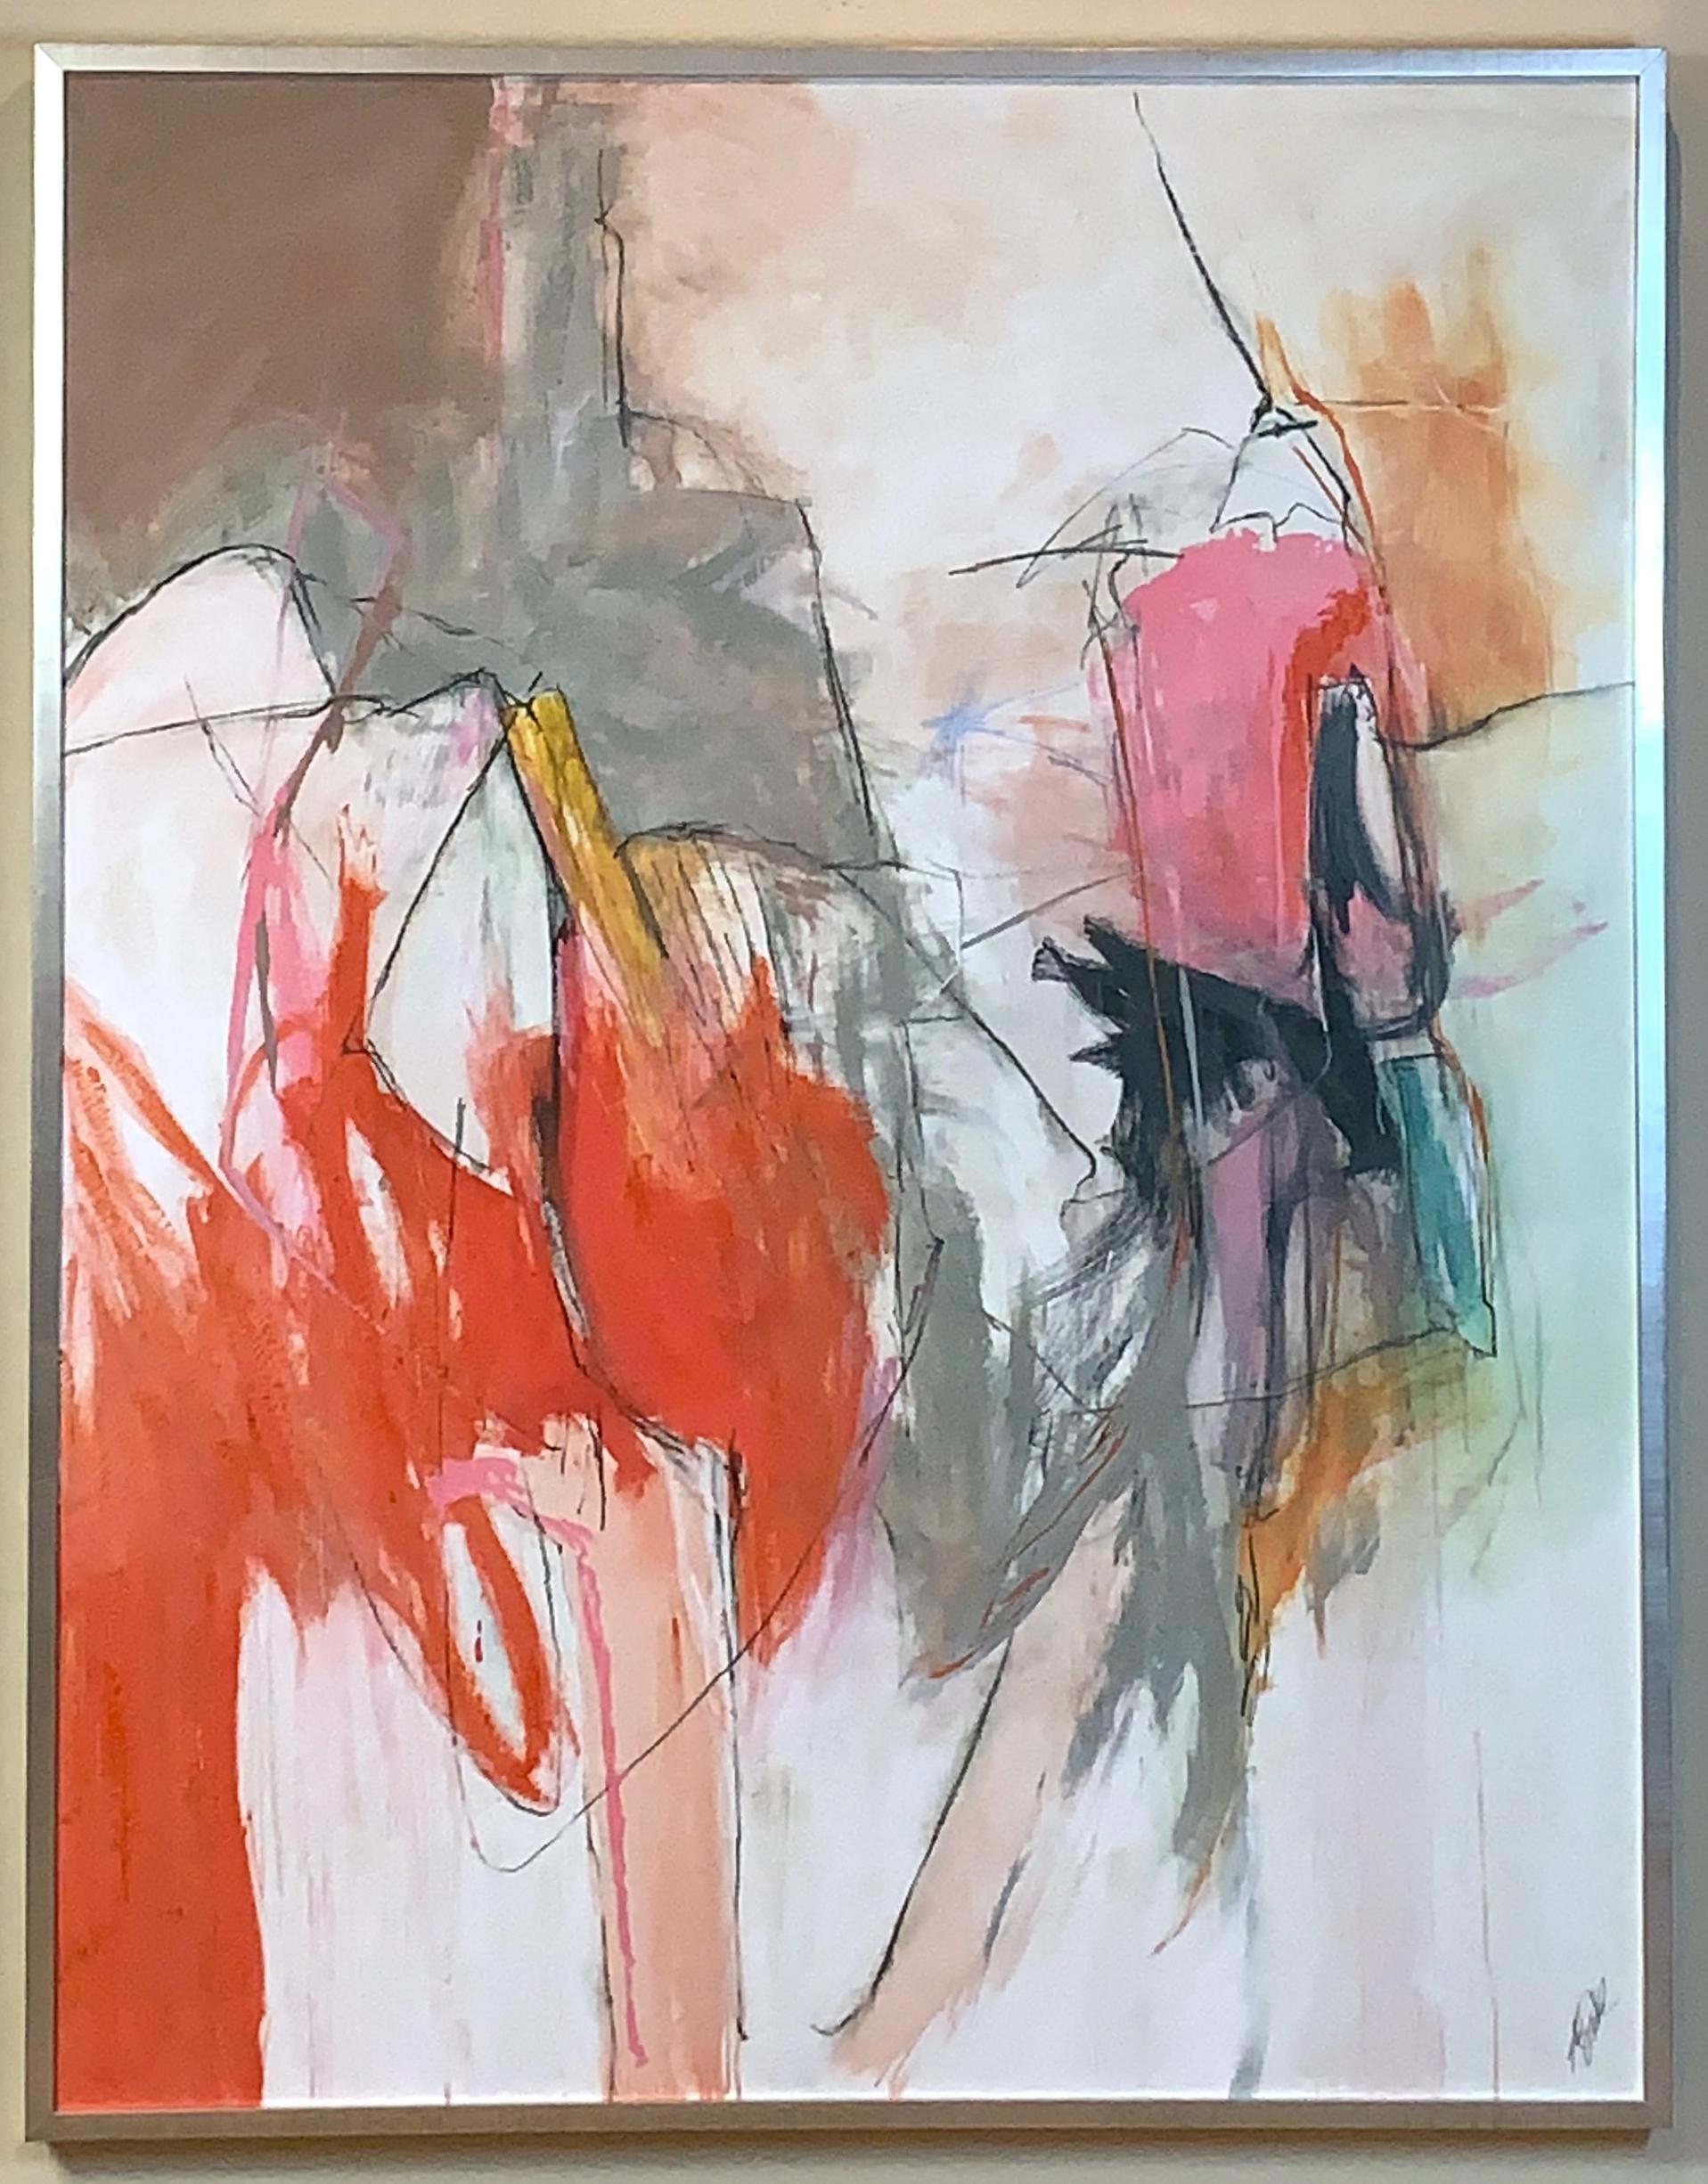 Unknown Large Abstract Painting in Oranges, Pinks and Grays